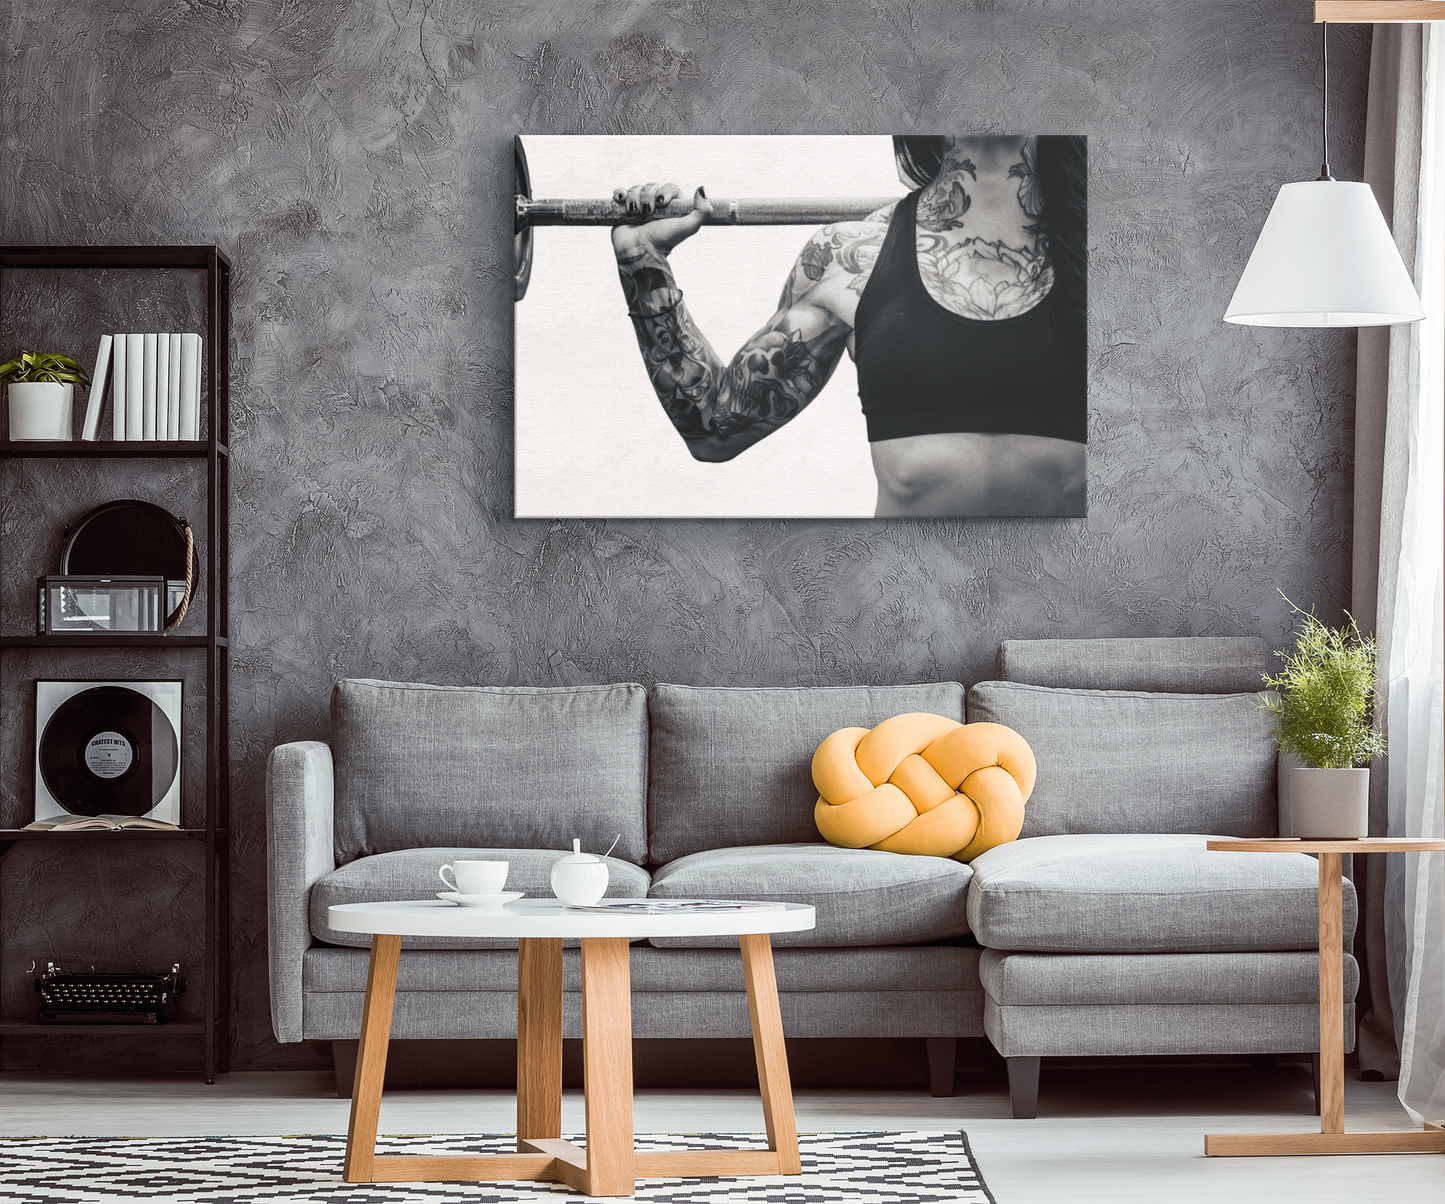 Female Weightlifter Wall Art - Woman Bodybuilder Black and White Canvas For Gym Room or Office